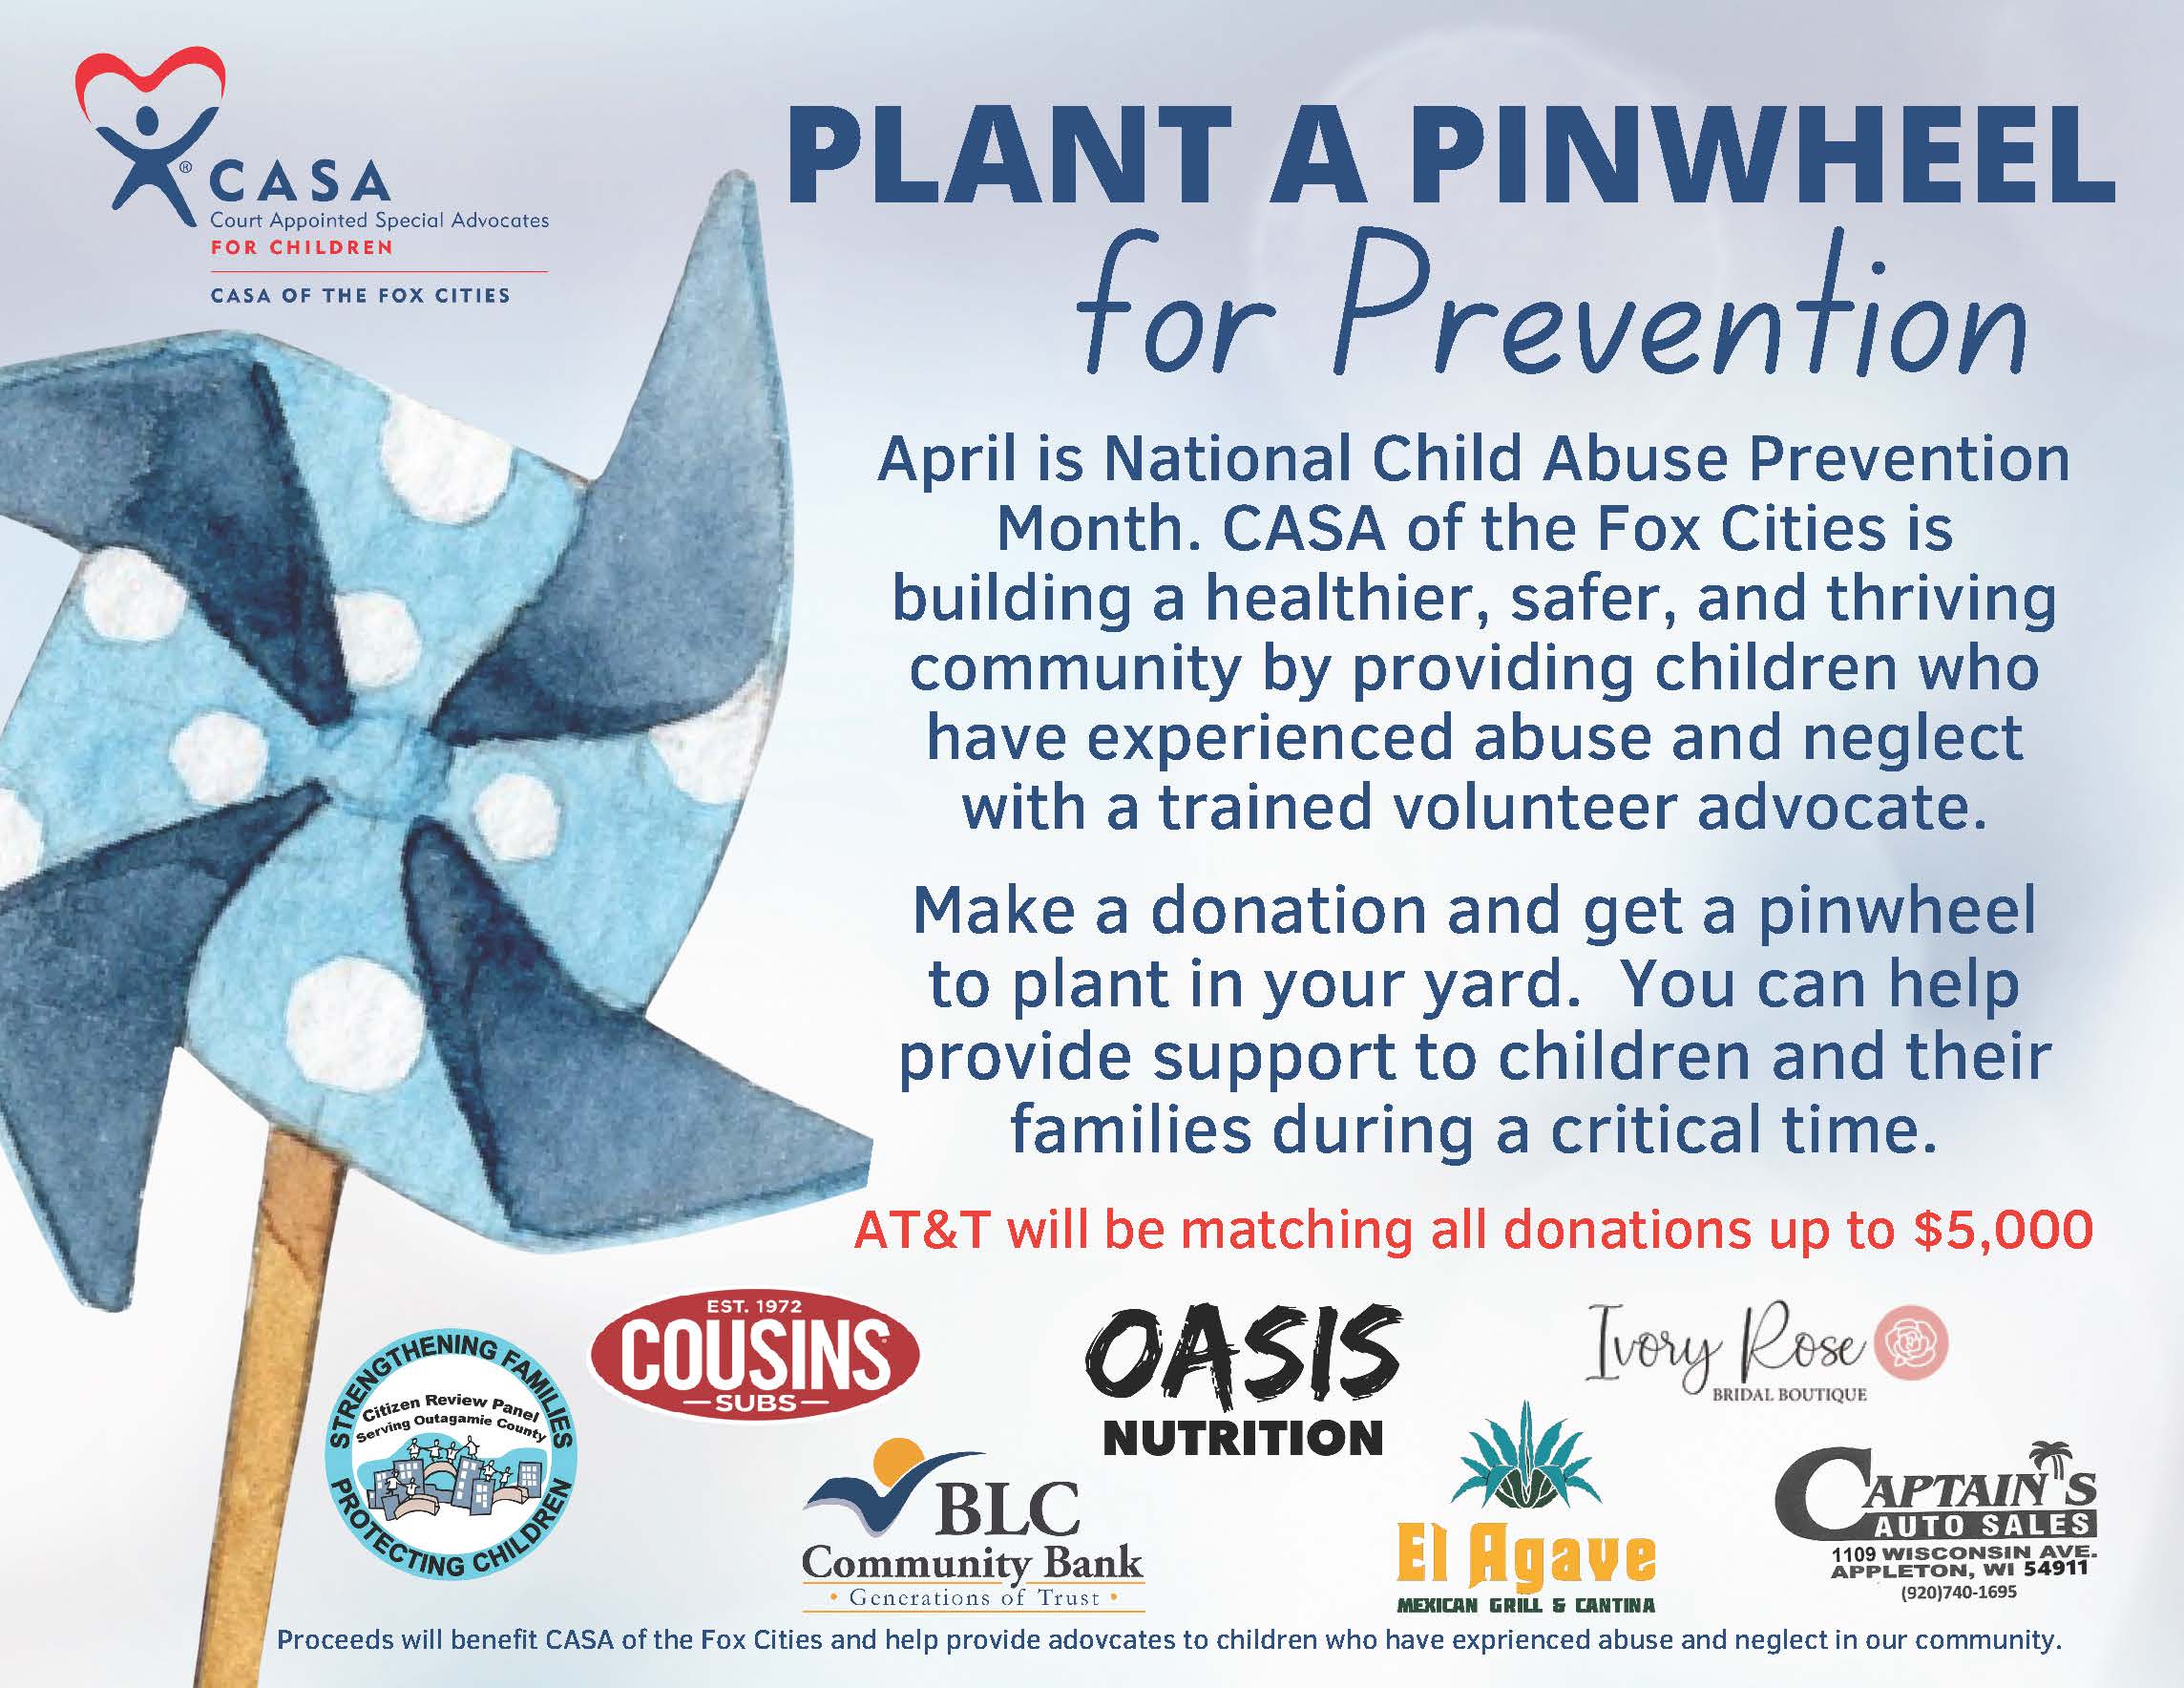 BLC teamed up with CASA of the Fox Cities for their Pinwheels for Prevention Fundraiser.